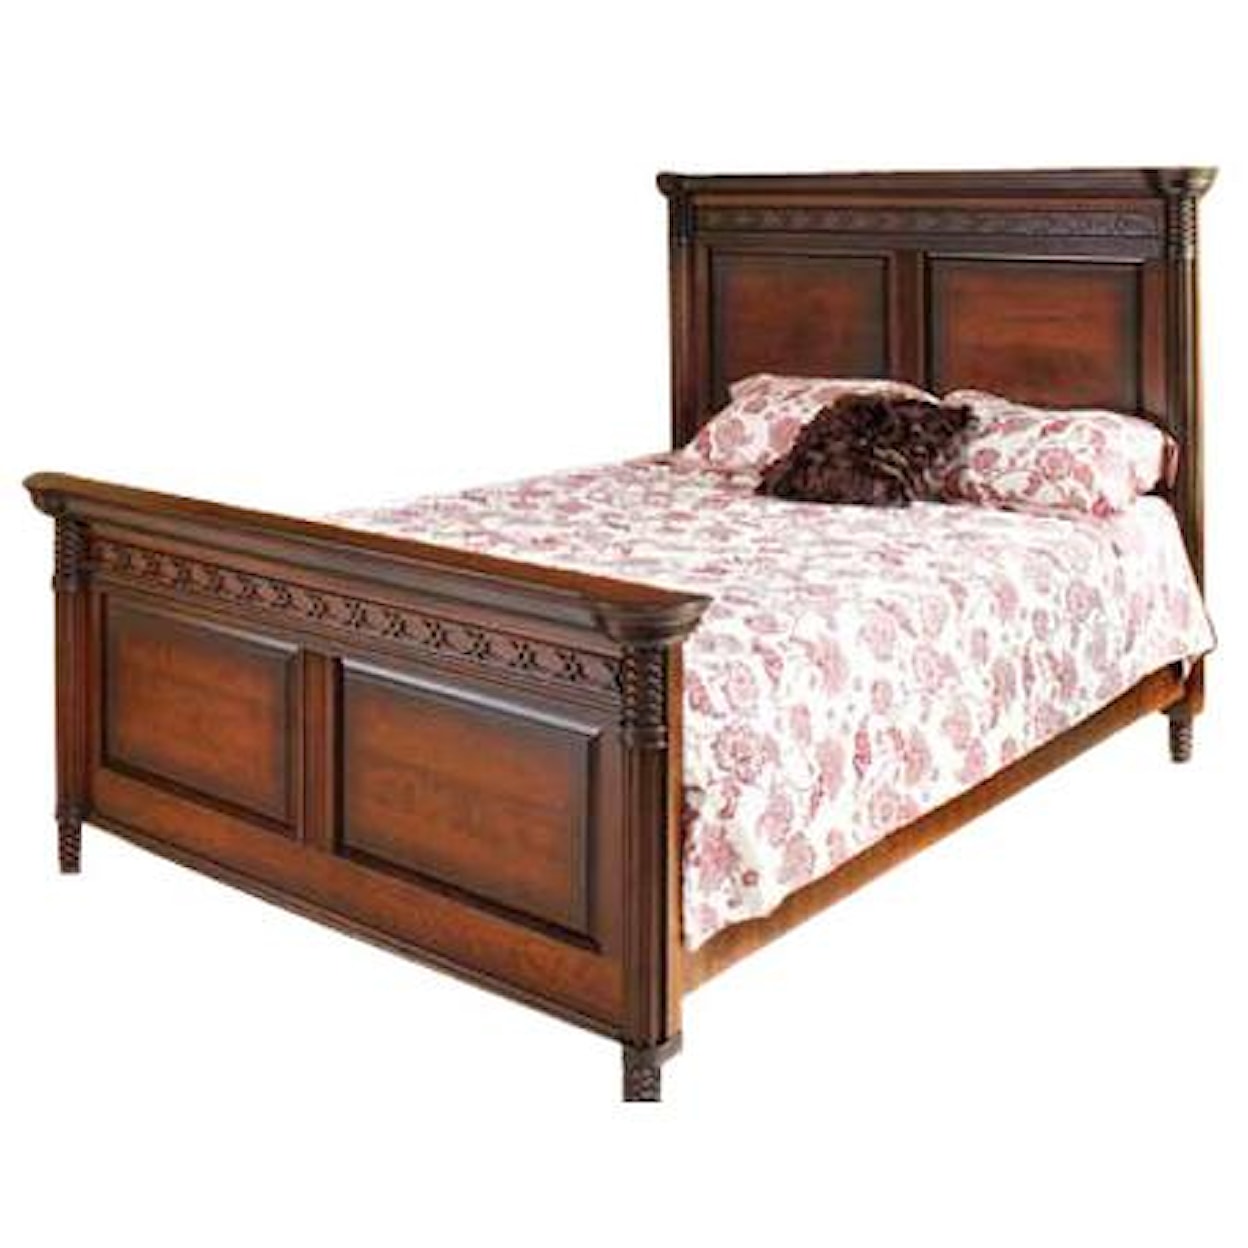 The Urban Collection New Generations California King Panel Bed with High FB